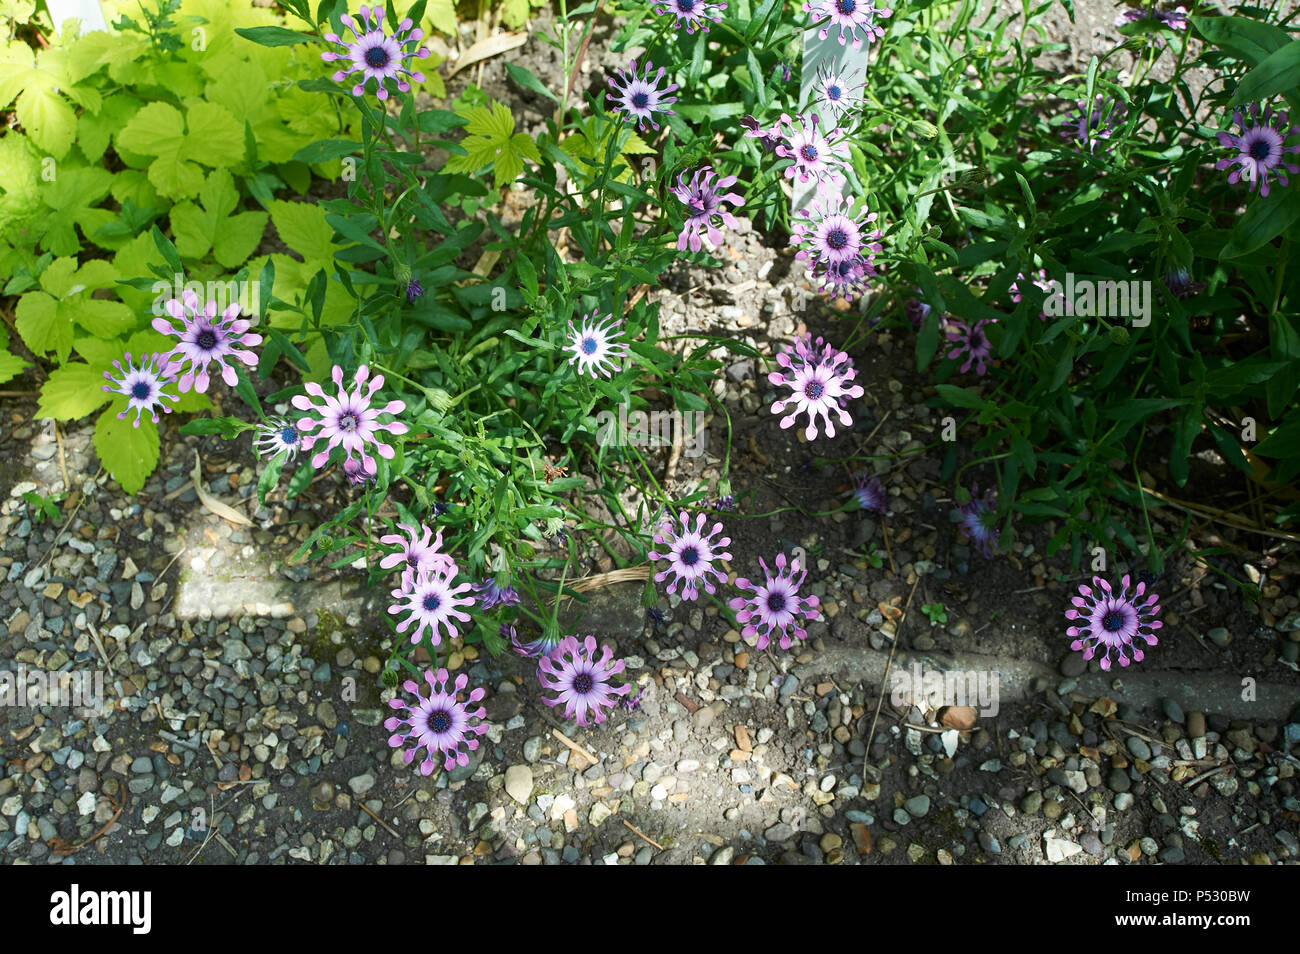 osteospermum fruticosum, also called shrubby daisybush or trailing African daisy is a flowering plant native to South Africa Stock Photo